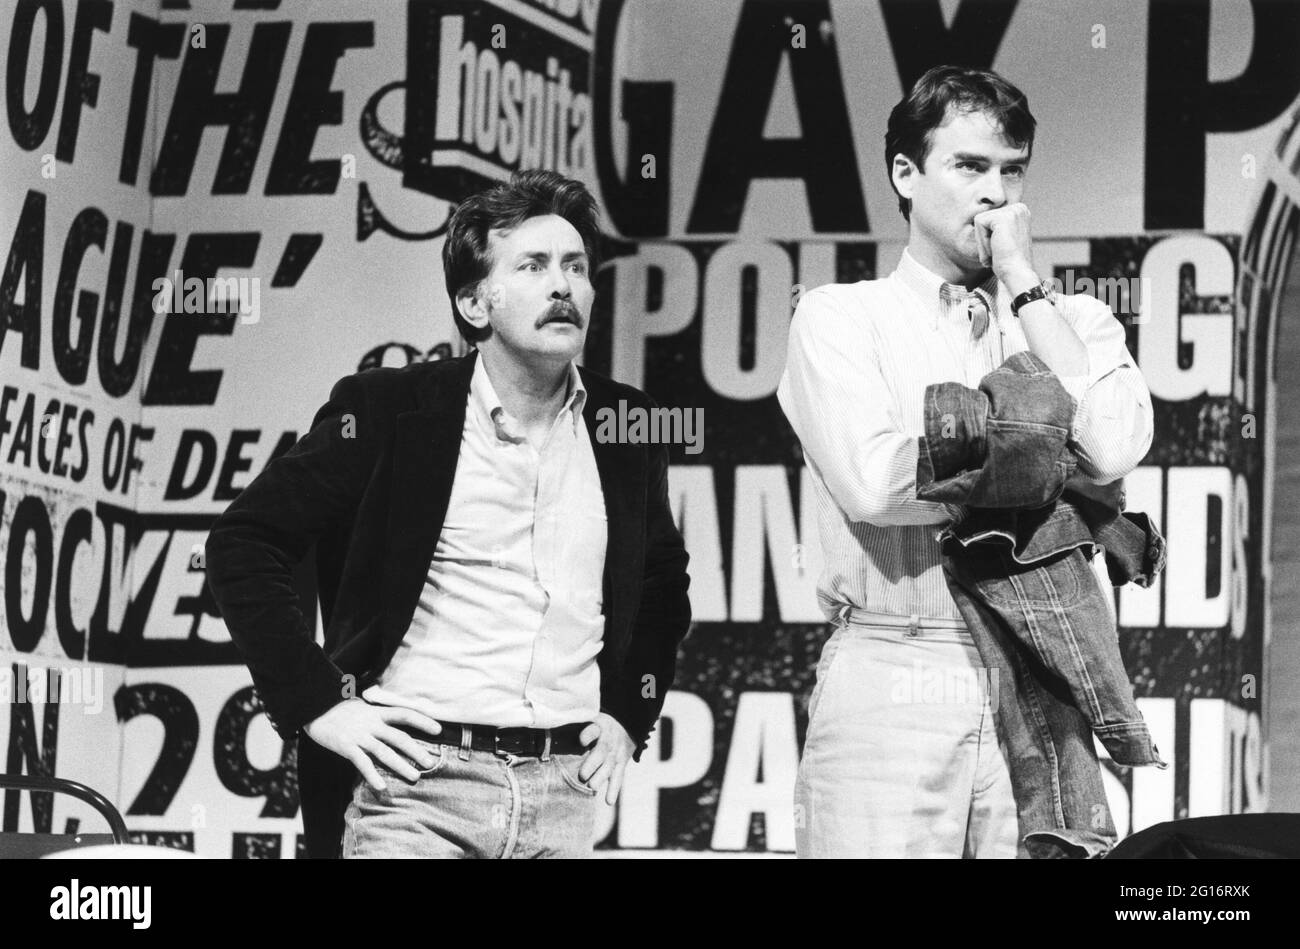 l-r: Martin Sheen (Ned Weeks), John Terry (Bruce Niles) in THE NORMAL HEART by Larry Kramer at the Royal Court Theatre, London SW1 20/03/1986  design: Geoff Rose  lighting: Gerry Jenkinson  director: David Hayman Stock Photo